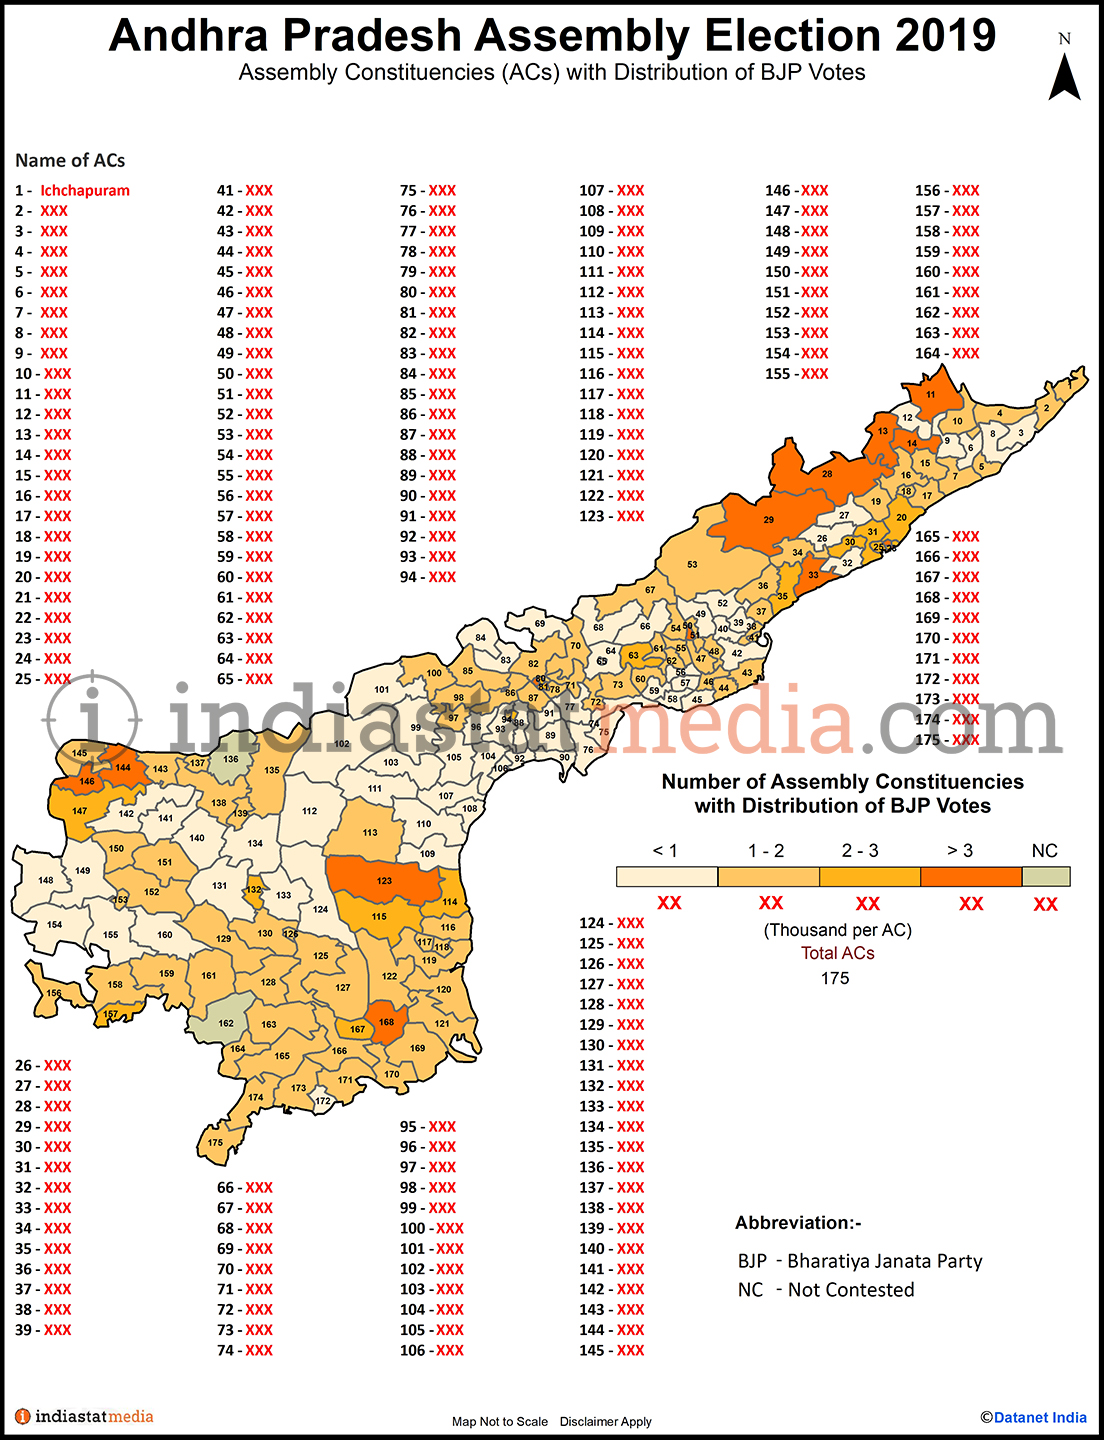 Distribution of BJP Votes by Constituencies in Andhra Pradesh (Assembly Election - 2019)